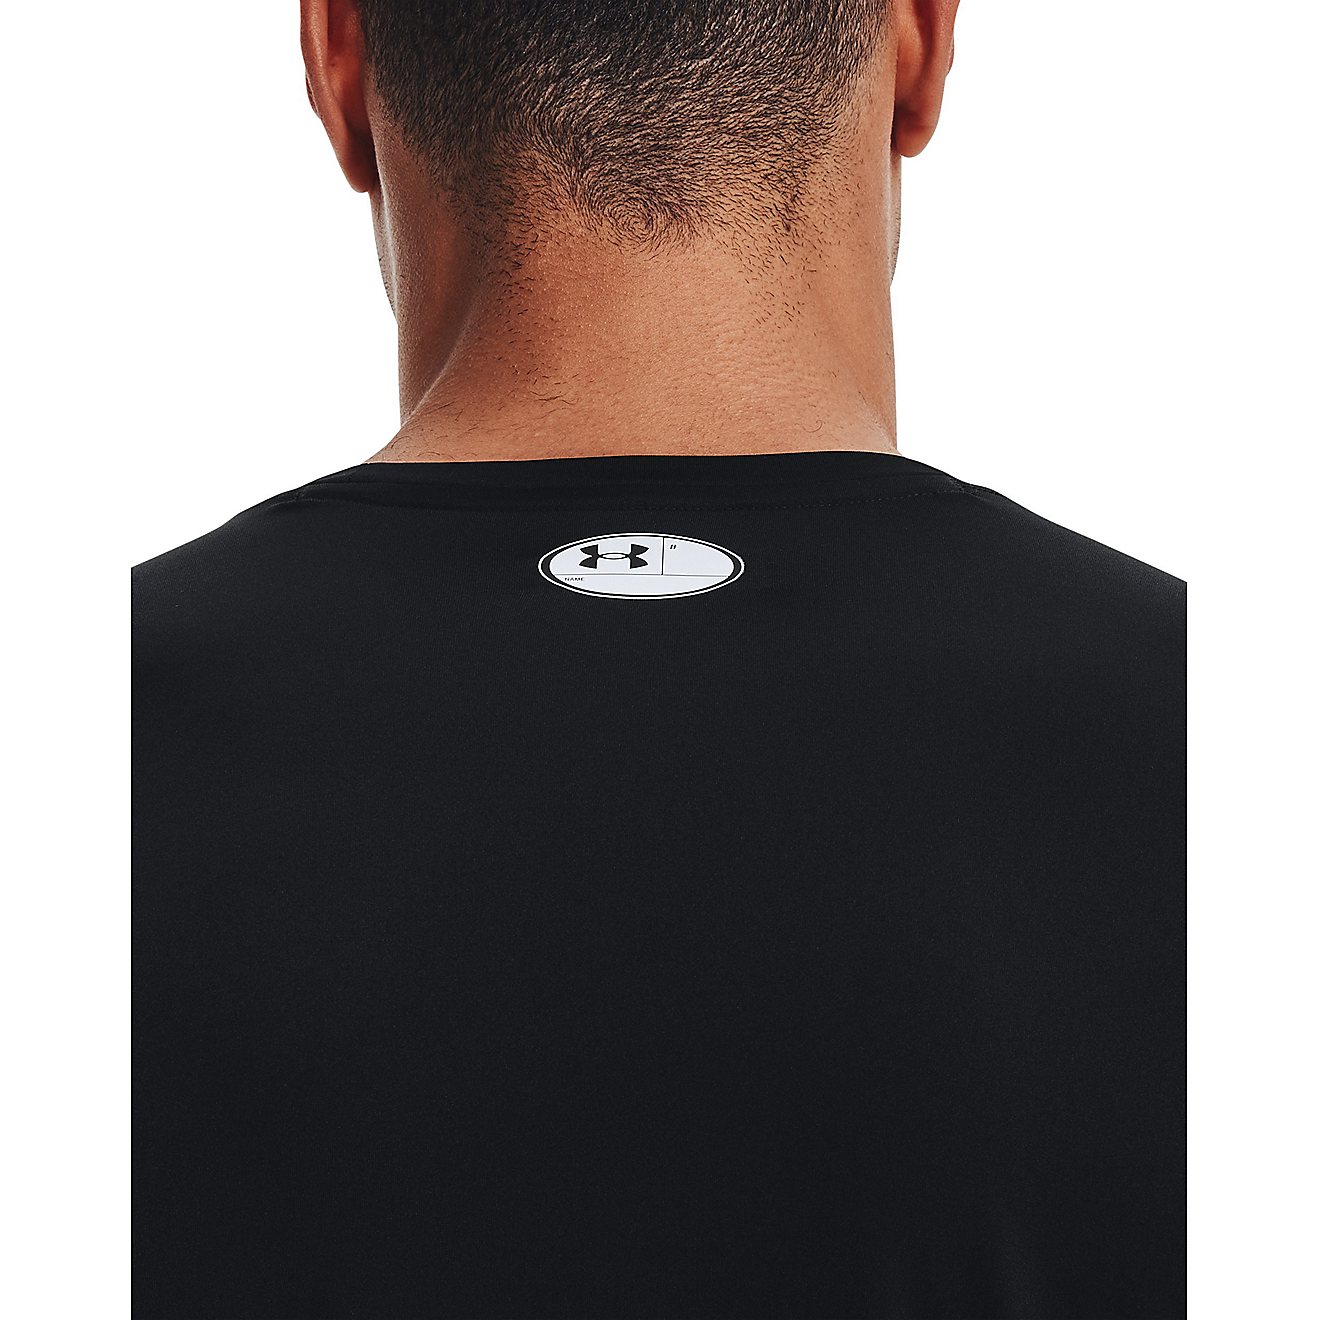 Under Armour Men's HeatGear Armour Fitted Long Sleeve Top                                                                        - view number 3